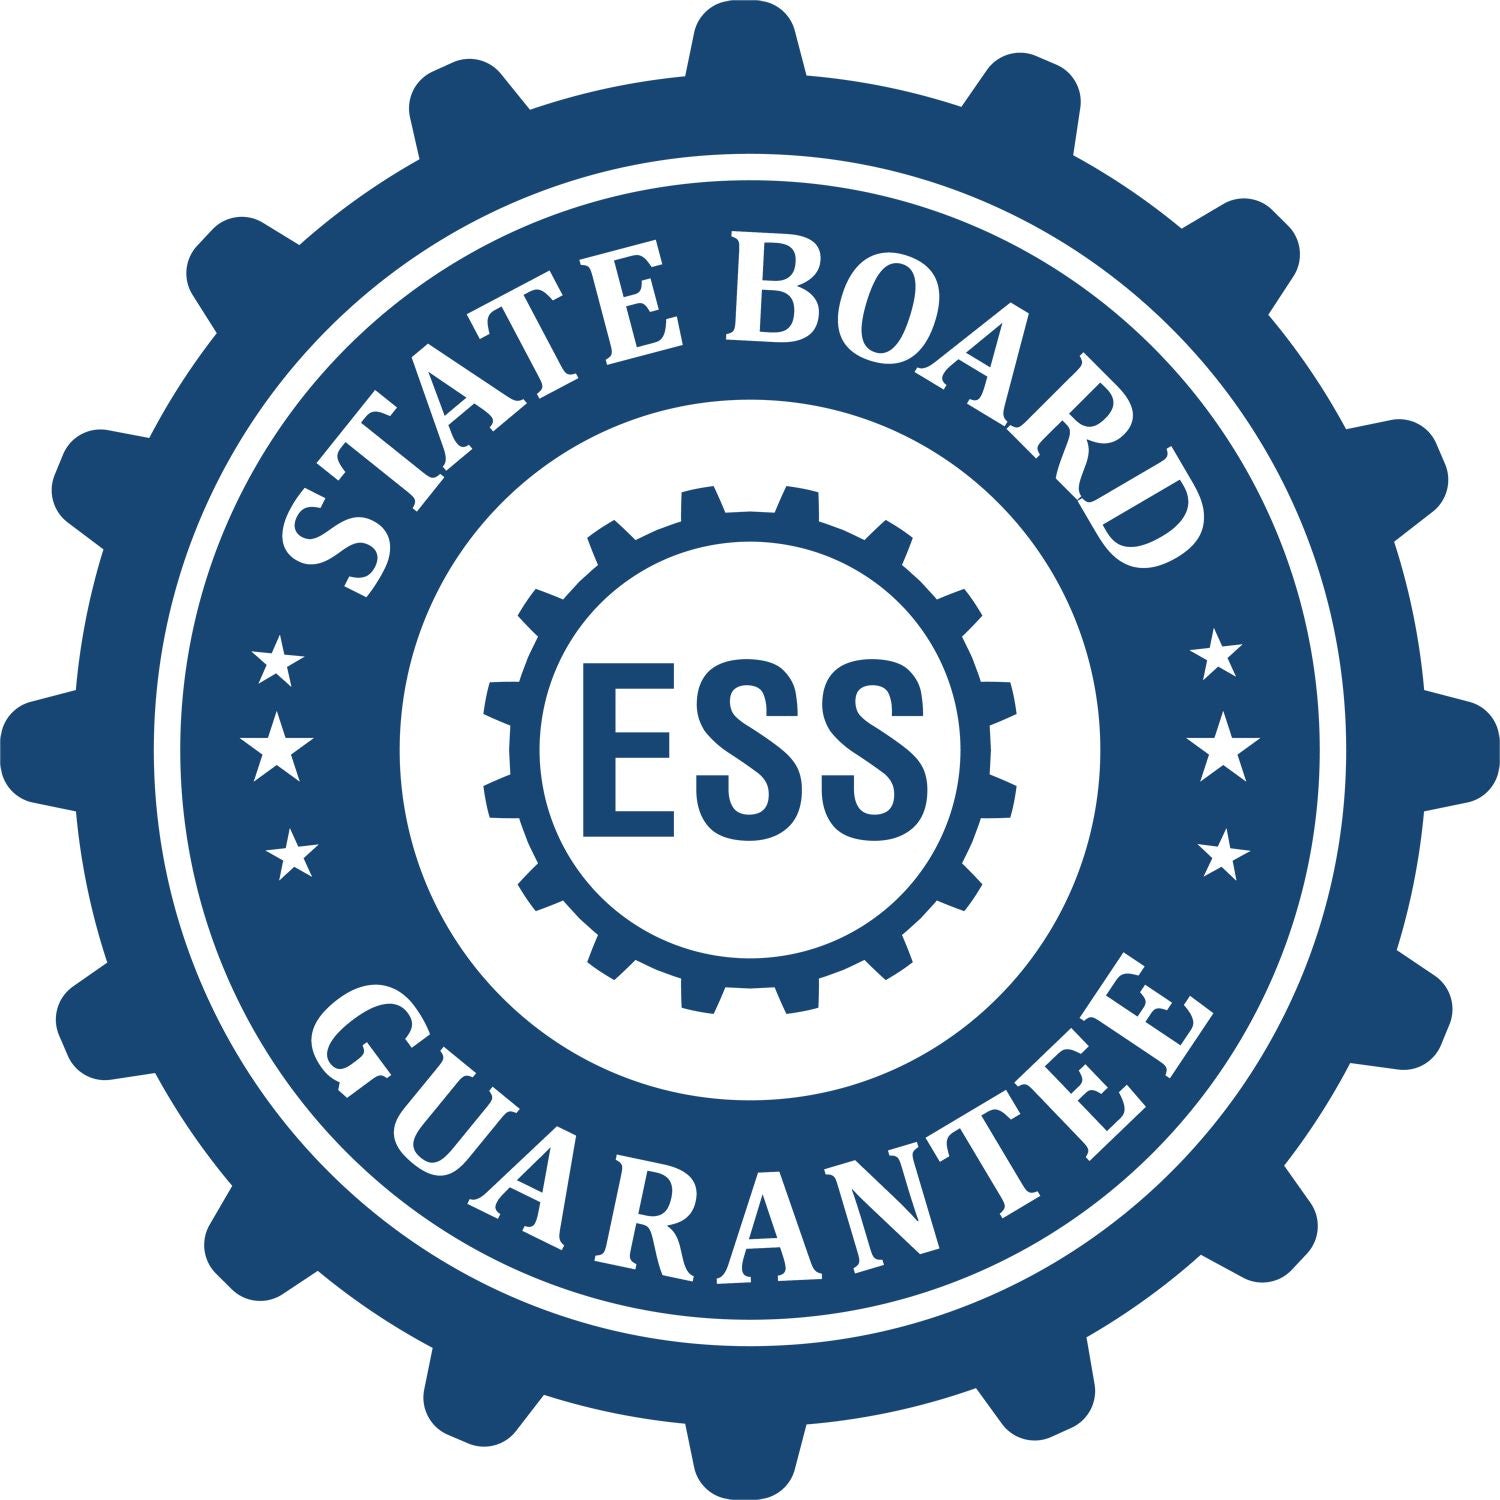 An emblem in a gear shape illustrating a state board guarantee for the Handheld Colorado Professional Engineer Embosser product.